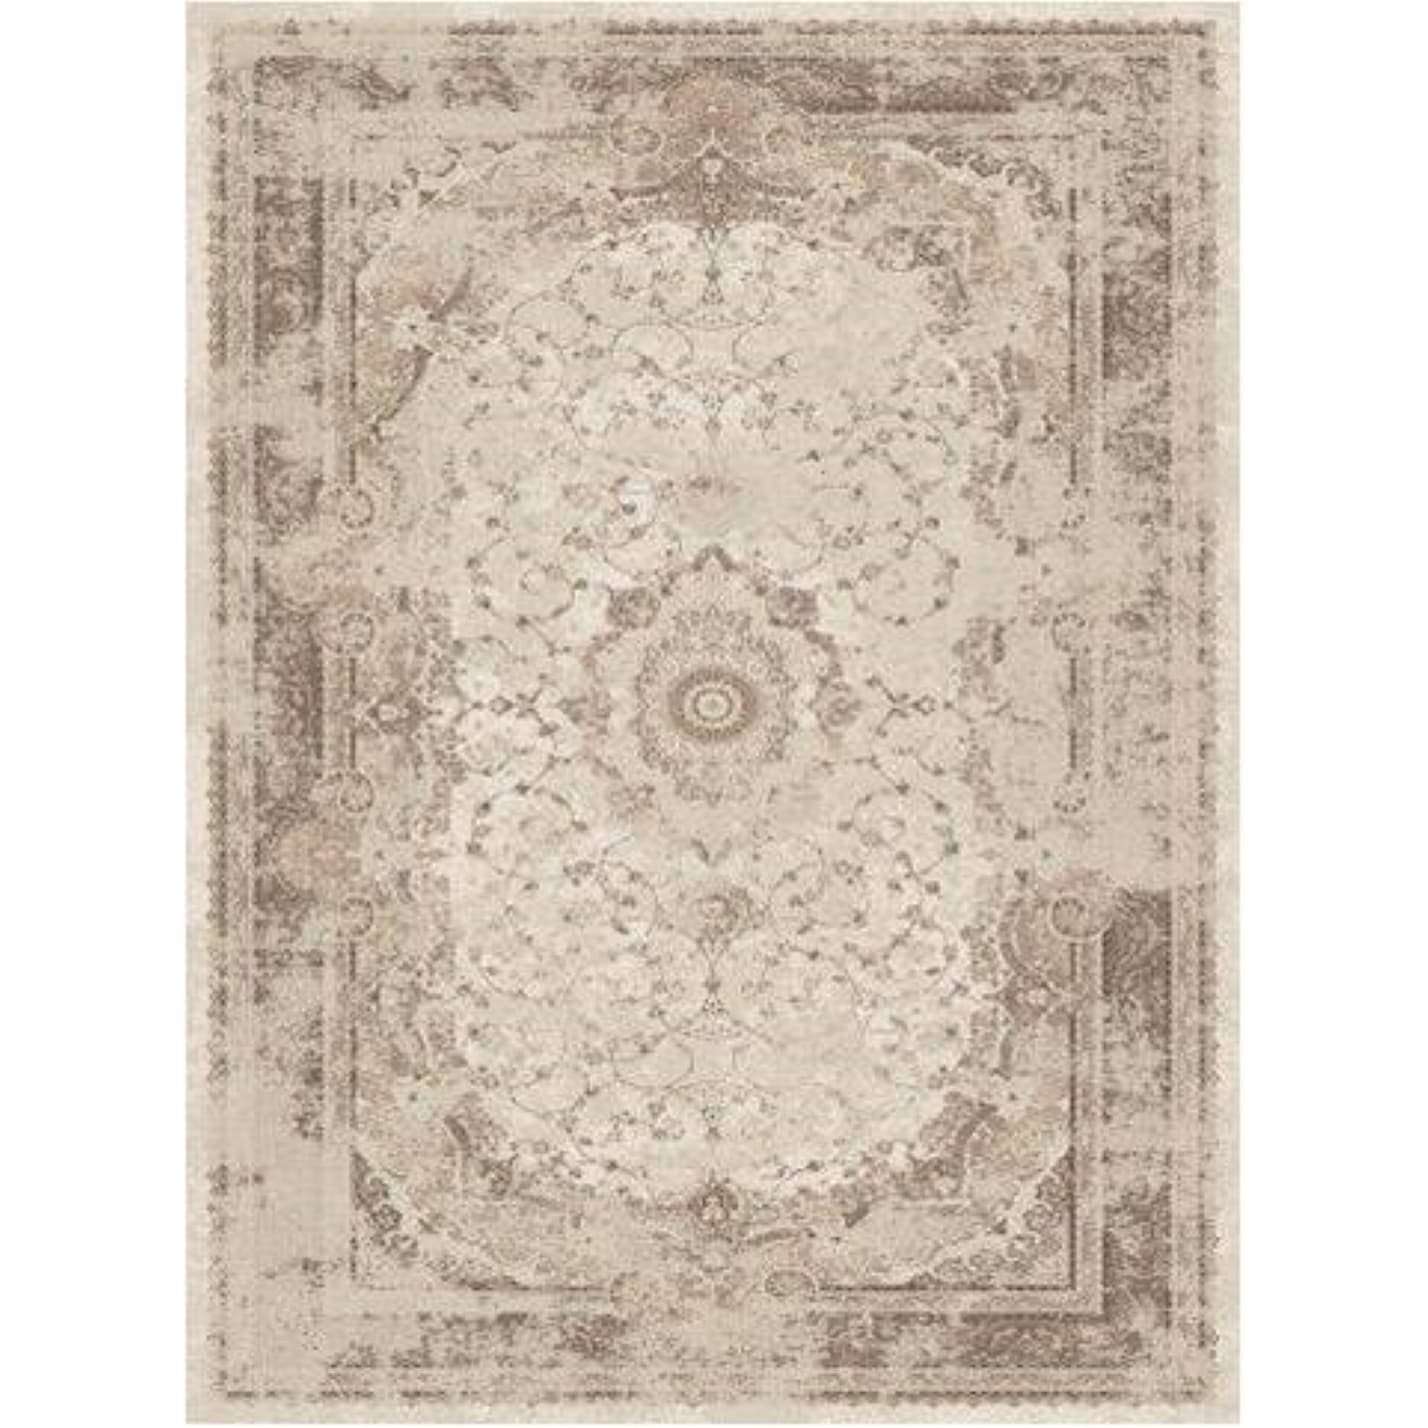 https://ak1.ostkcdn.com/images/products/is/images/direct/465b7ae70d05030666625968fb218278a21a649a/La-Dole-Rugs-Brown-Beige-Cream-Traditional-Flat-Pile-Area-Rug-Carpet-Living-Room-Hallway-Patio-Sizes-5x7%2C-8x10%2C-7X9-feet.jpg